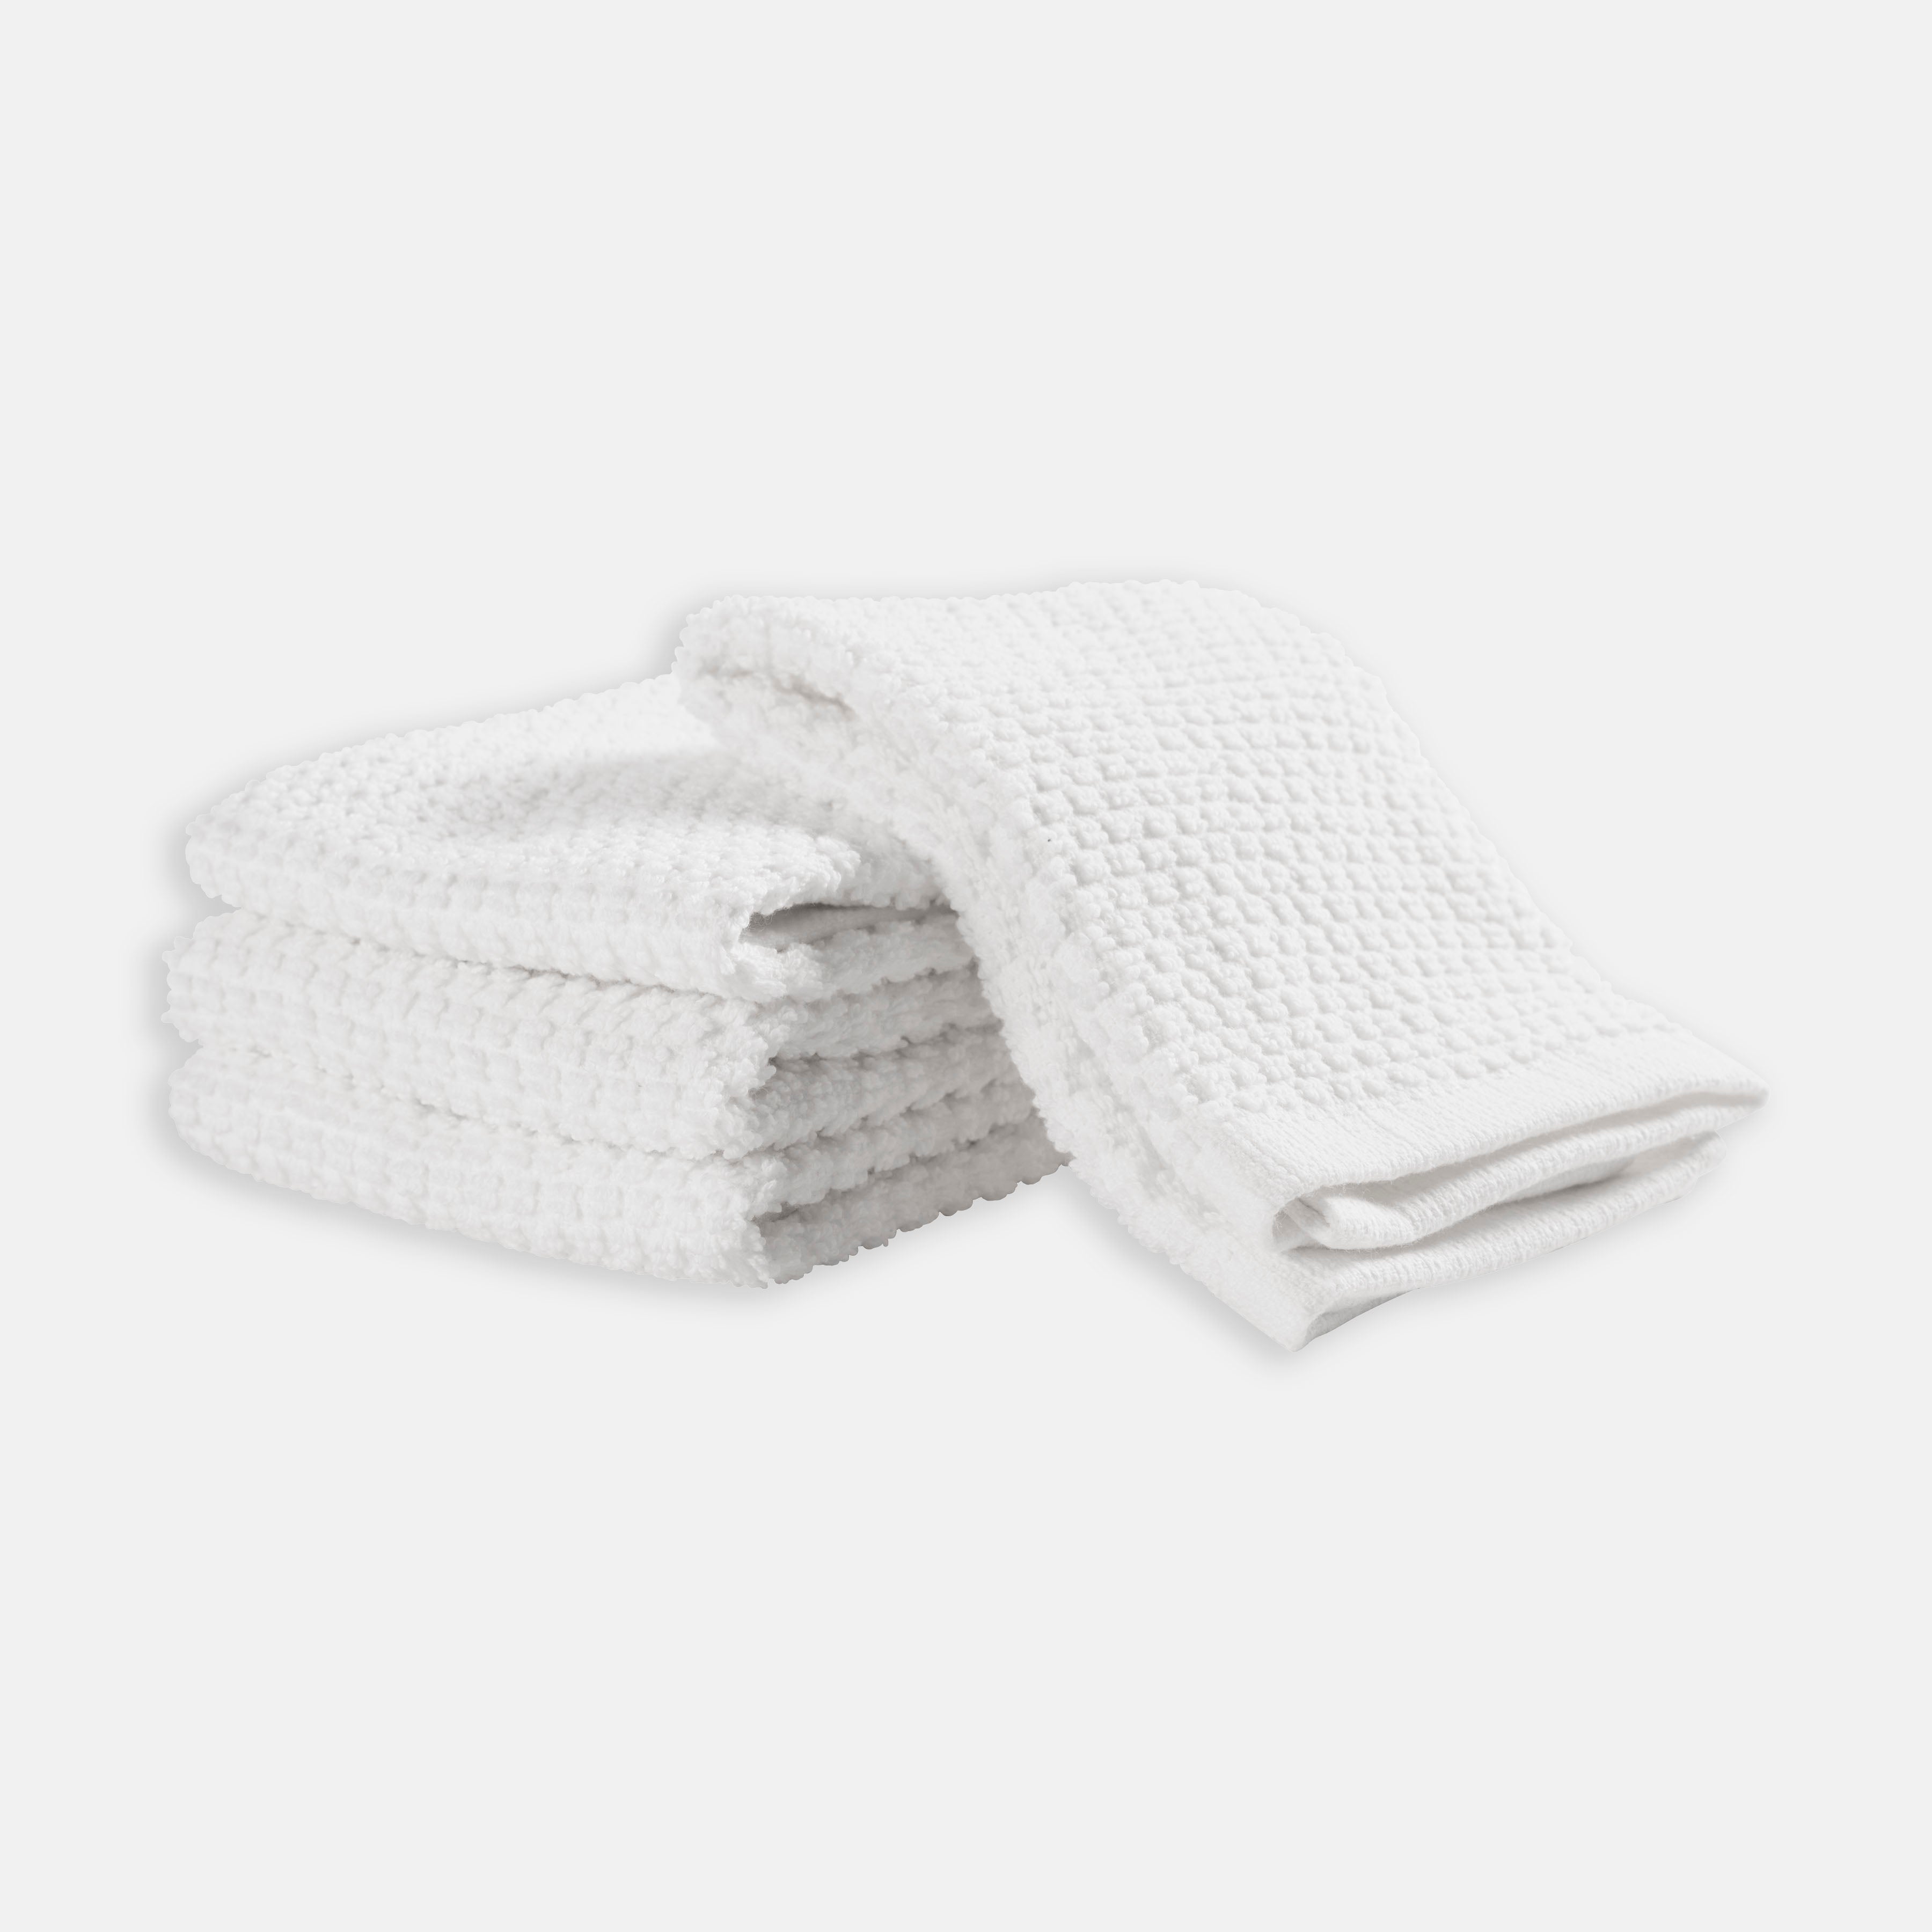 Dish Cloths For Washing Dishes - Super Soft Dish Rags And Dish